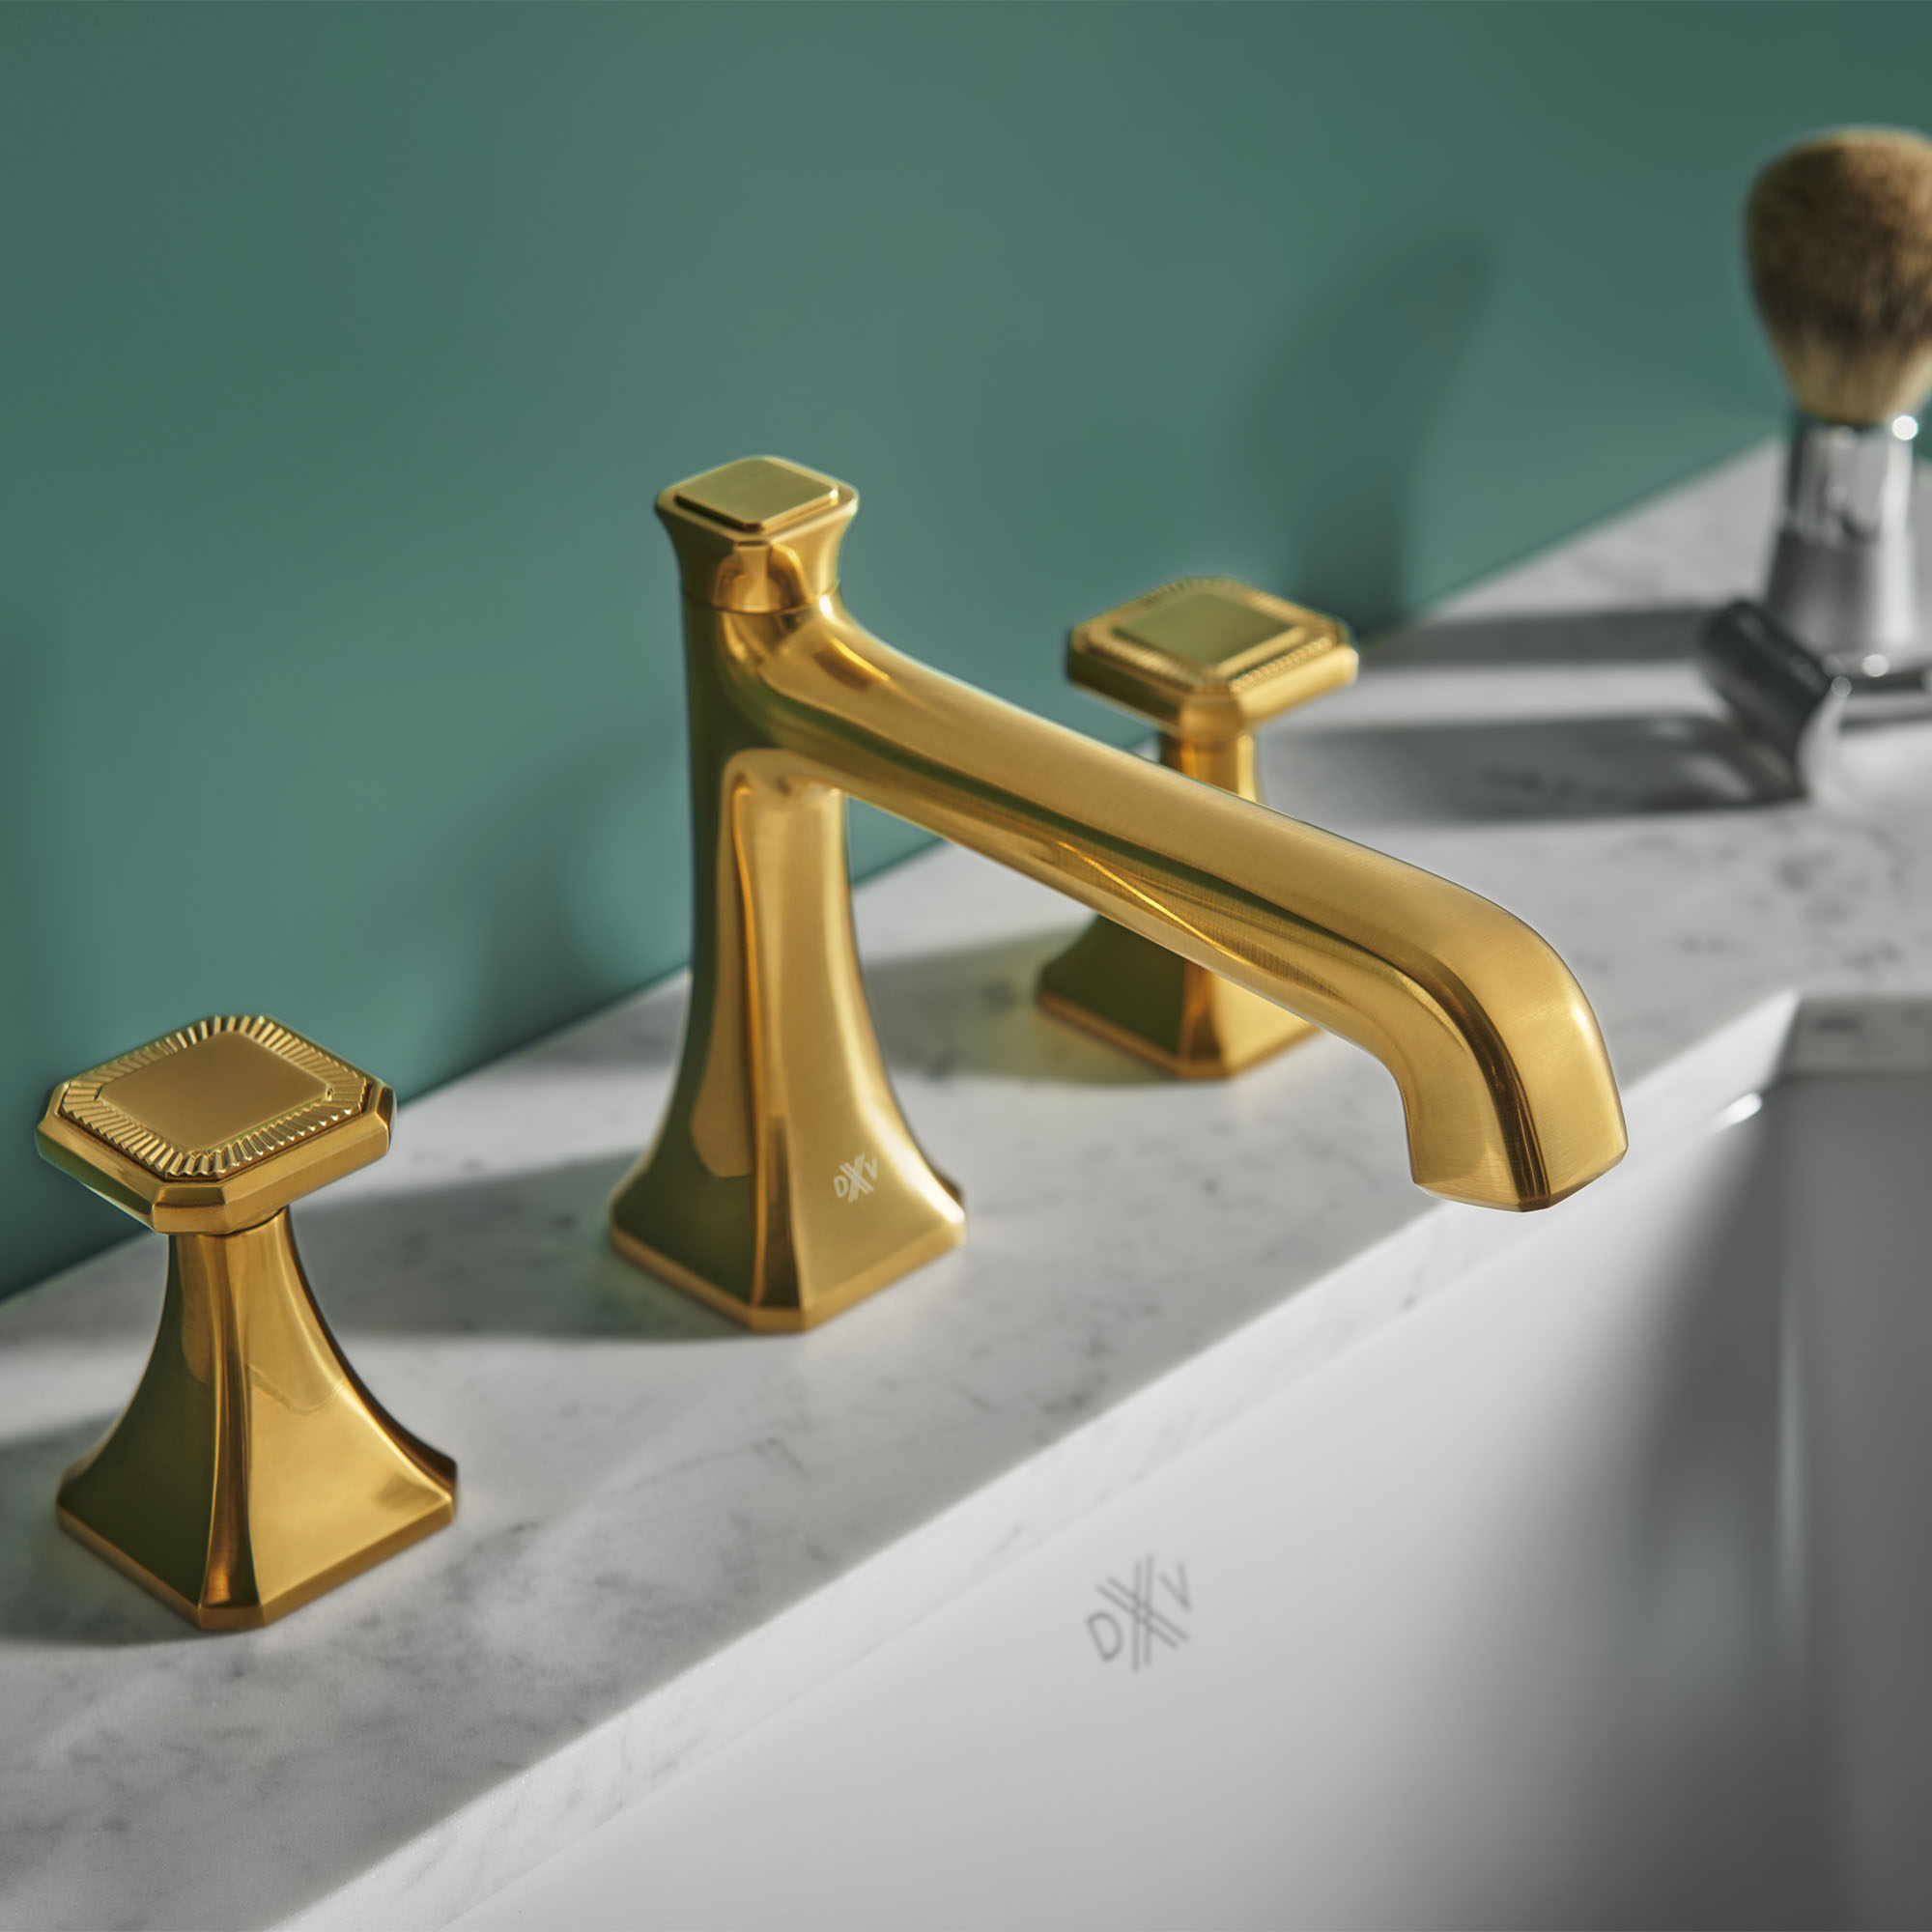 Belshire™ Cushion Handles Only for Widespread Bathroom Faucet